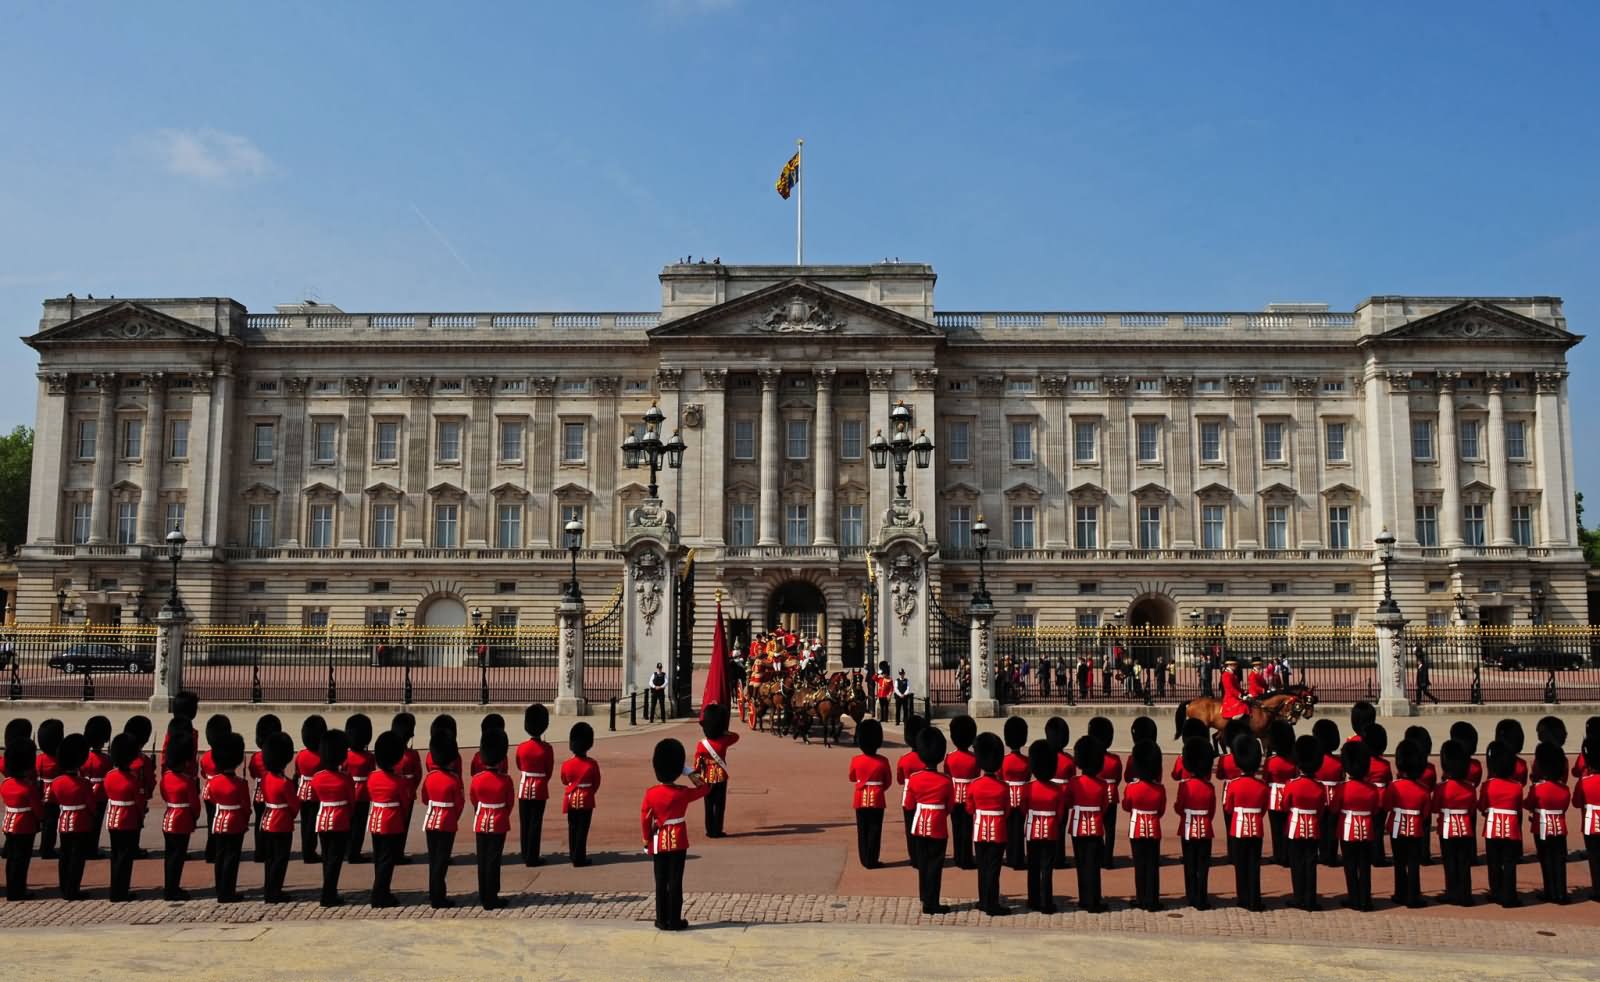 Guards In Front Of Buckingham Palace